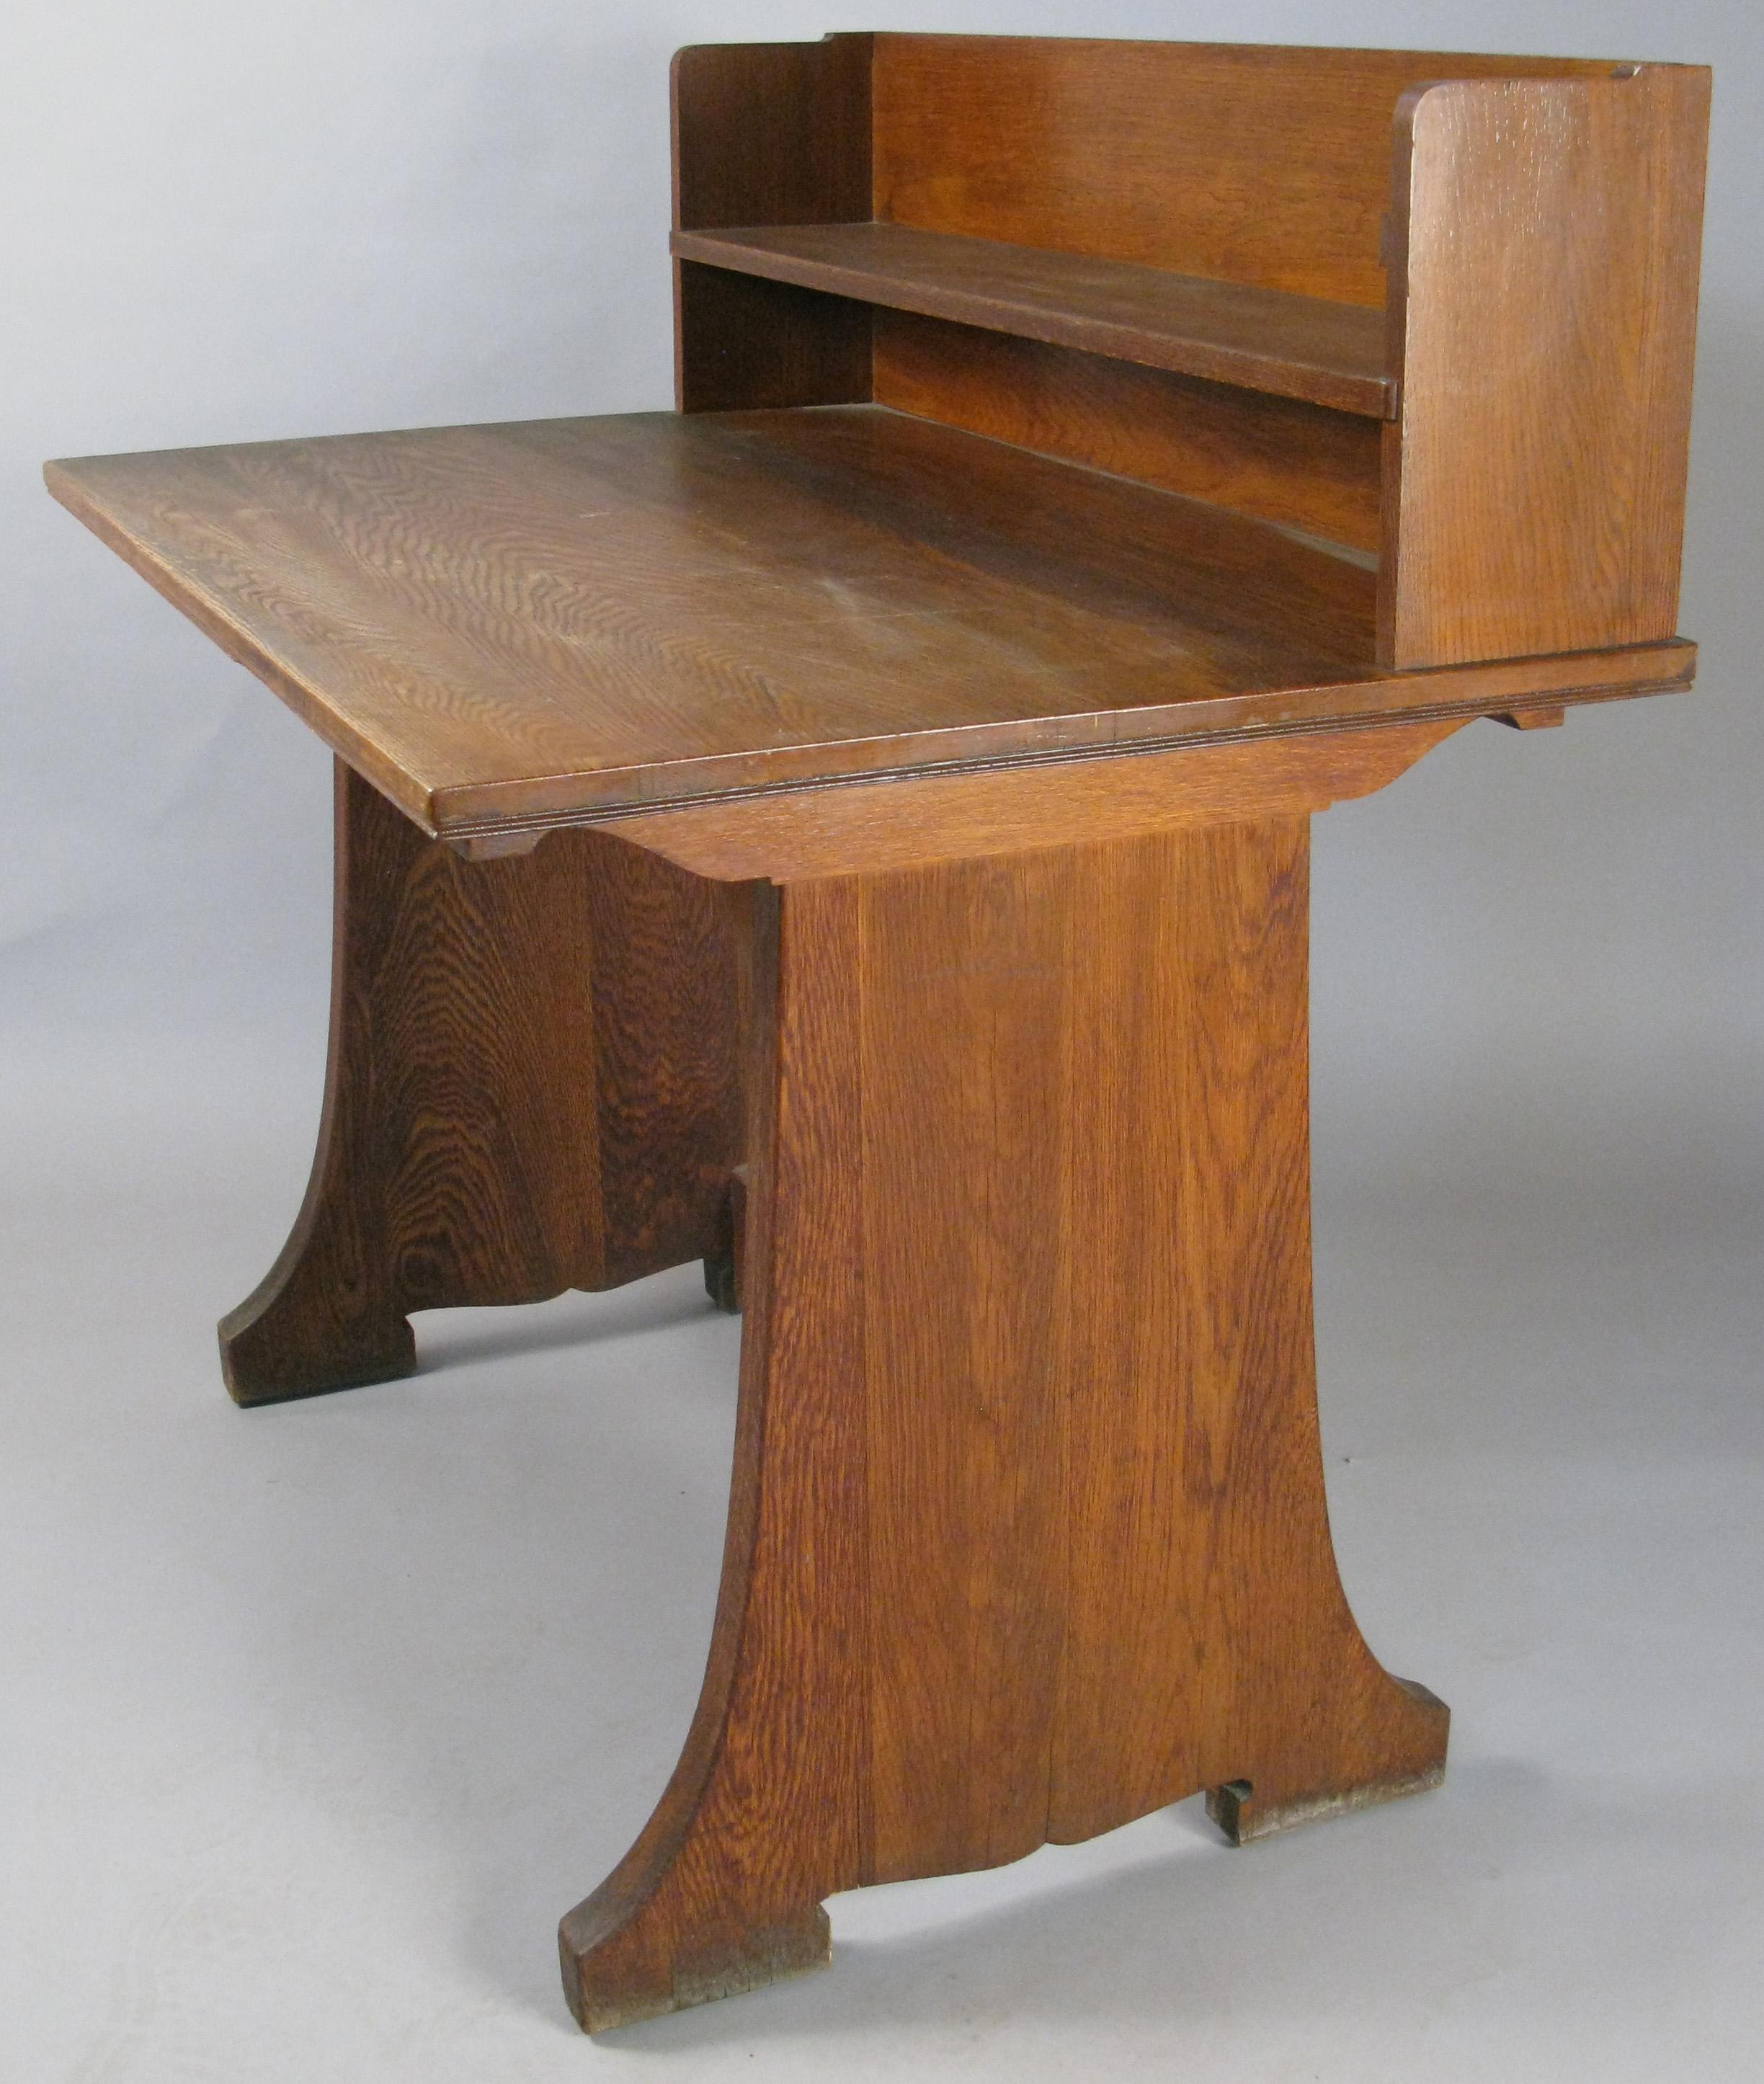 A very handsome antique oak writing desk originally from the Harvard Divinity School. With privacy riser in the back, and a slim shelf. Beautiful design and very well made. In good overall condition.

     